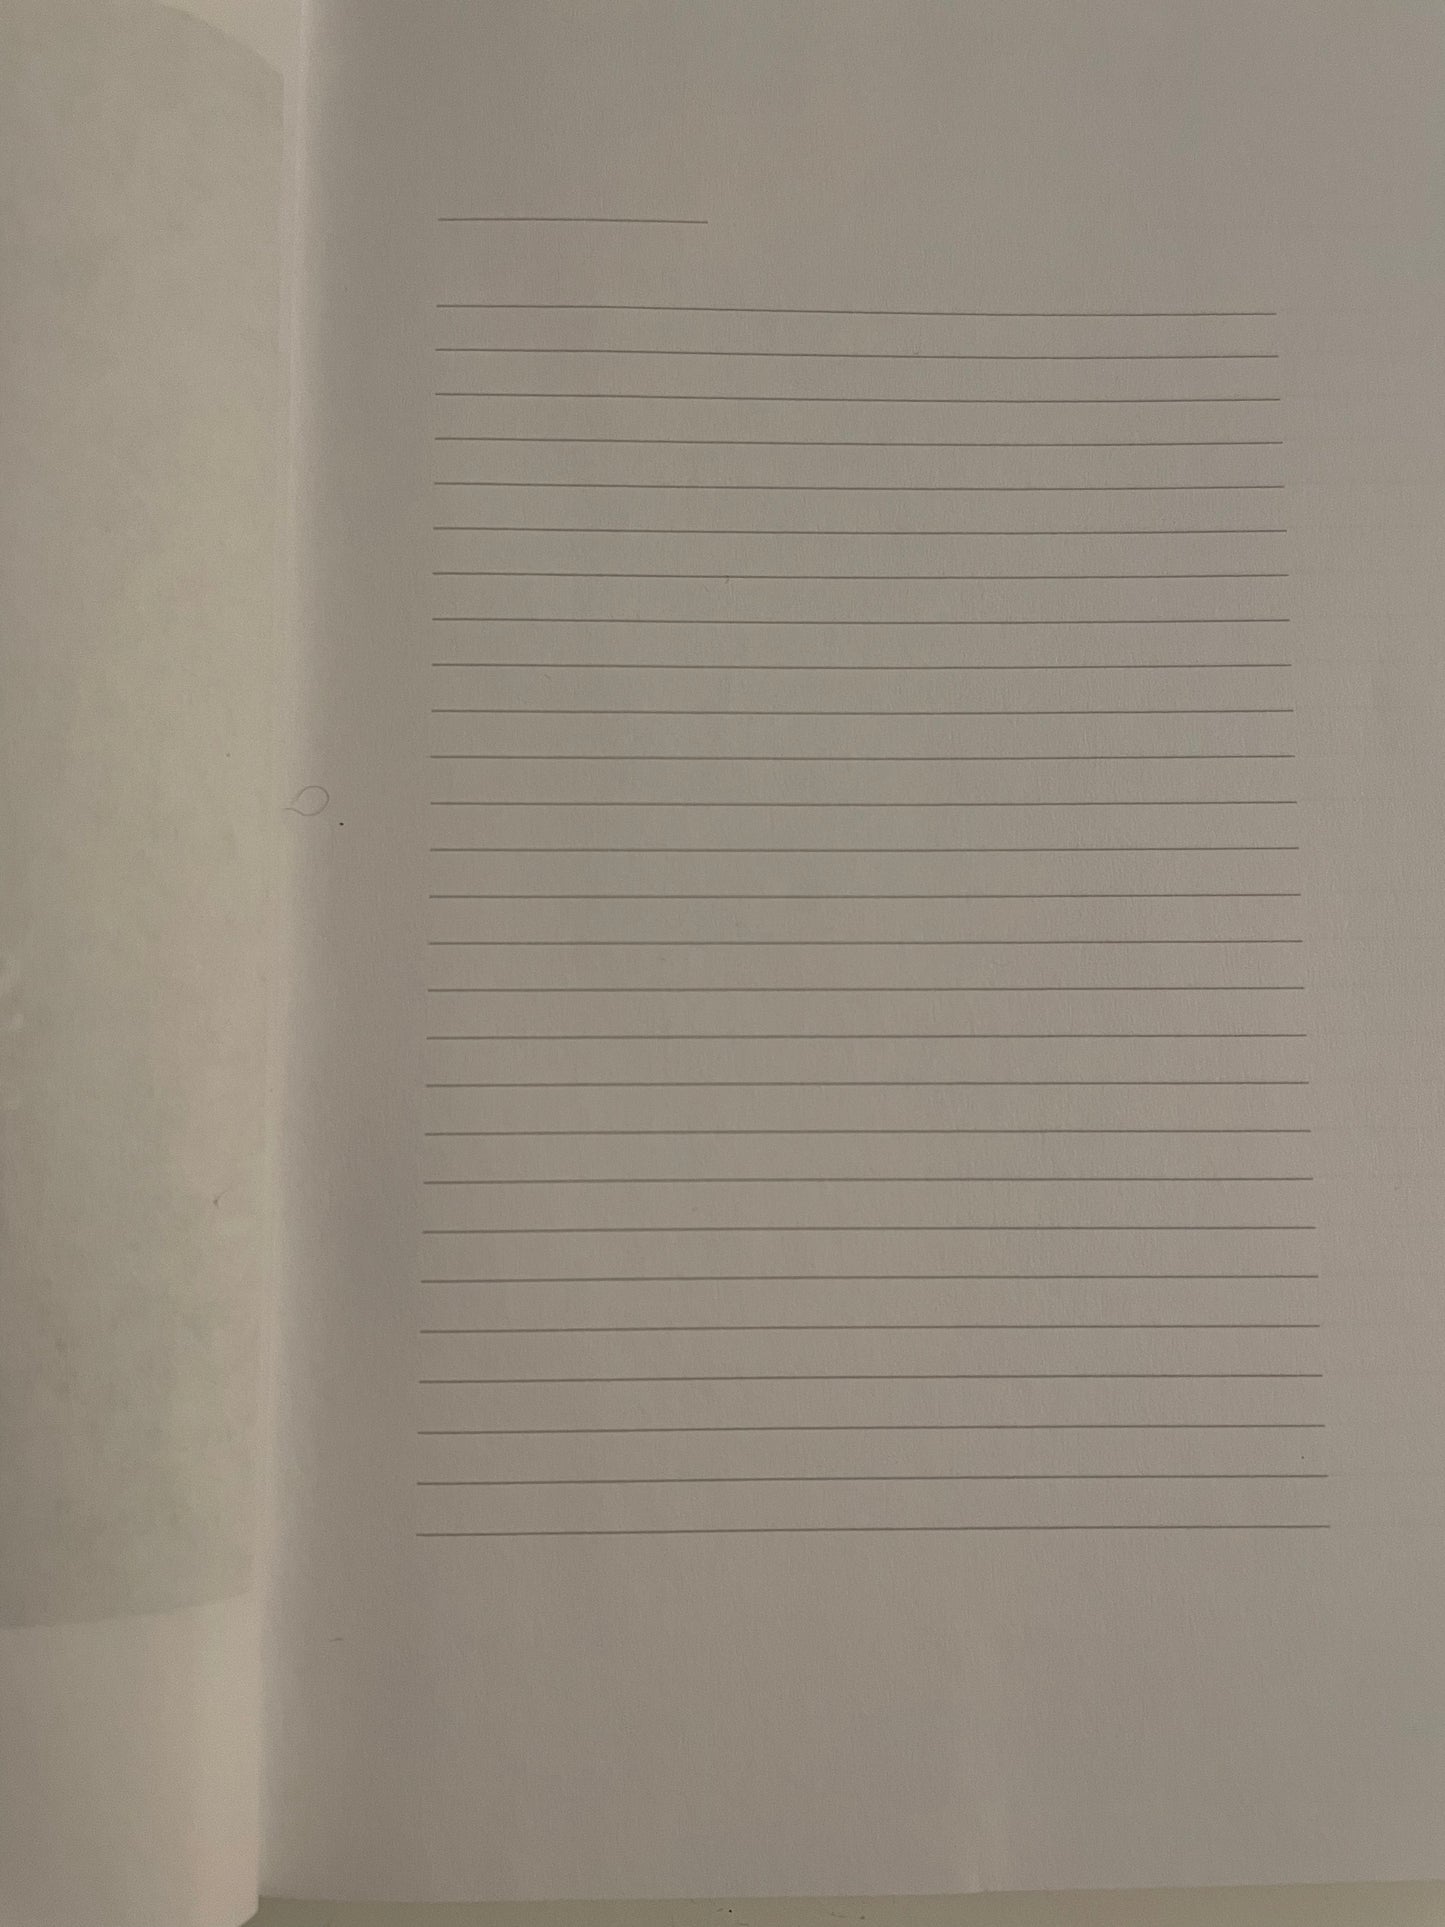 Sis, Write It Down - A Daily Journal / Blank Lined 200 Pages 6x9"